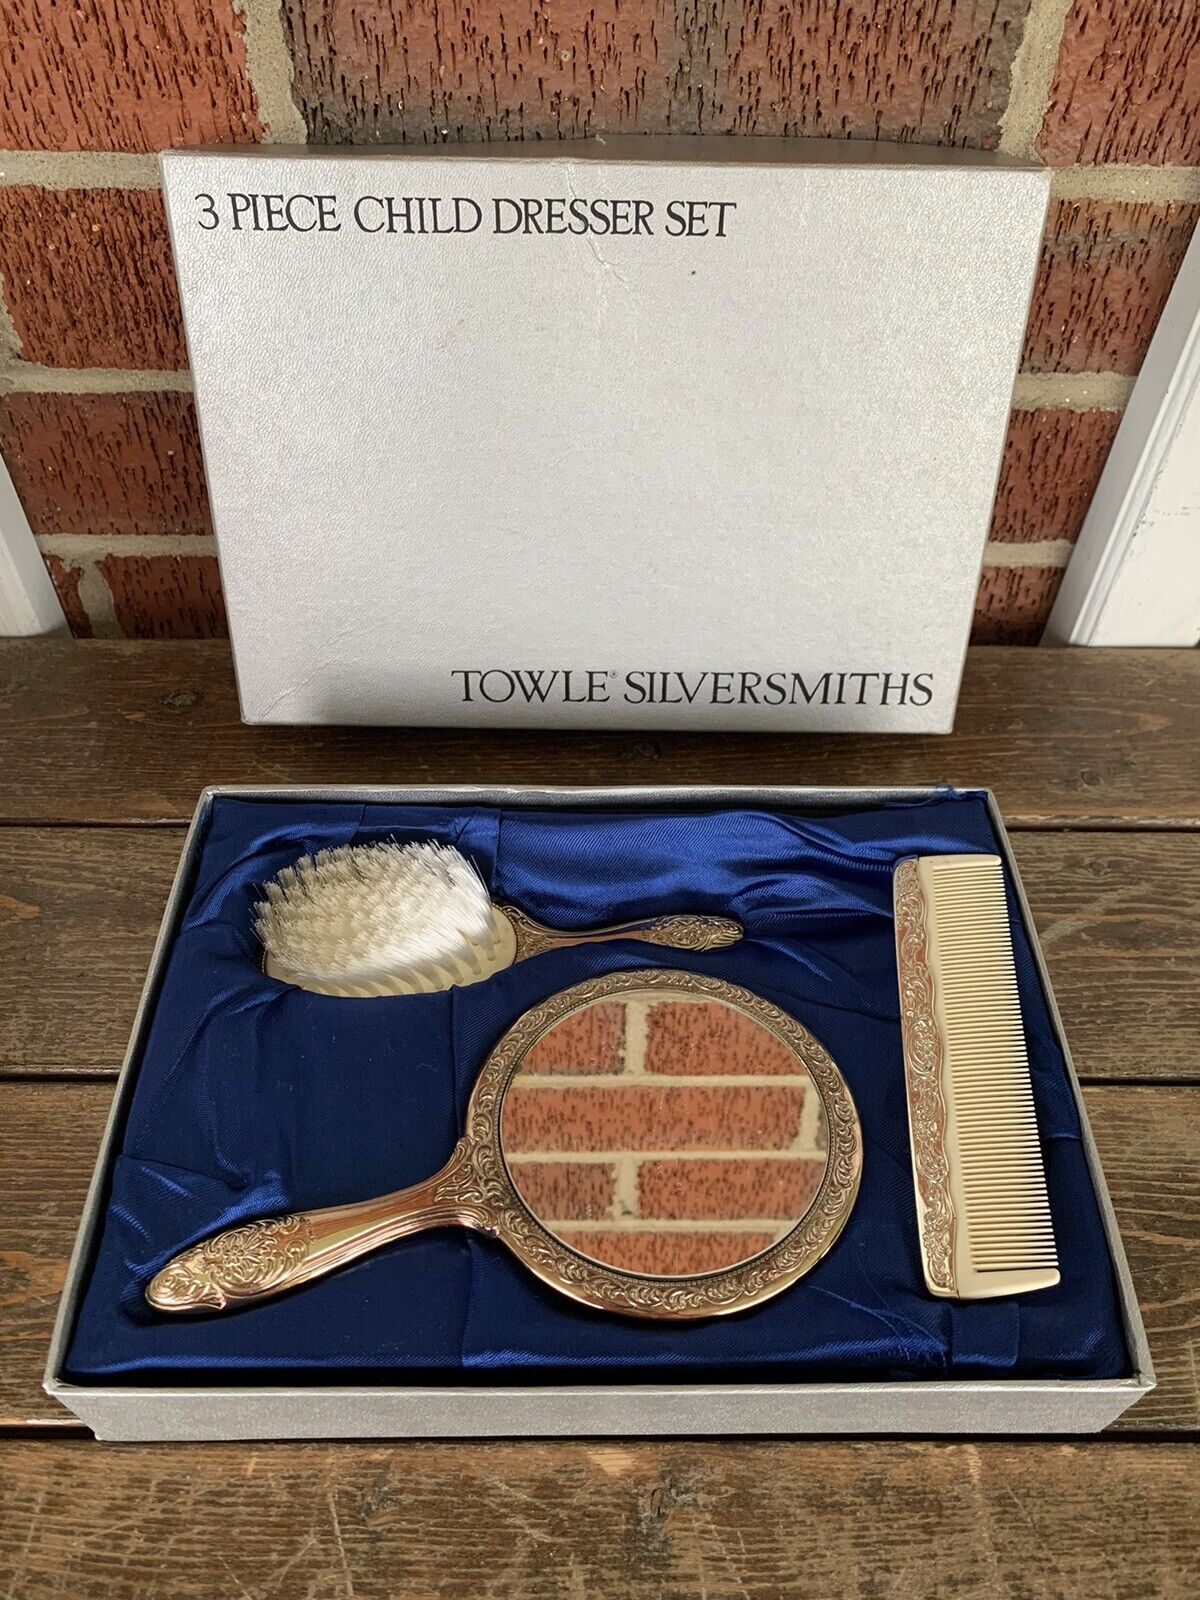 Vintage Towle Silversmiths 3 Piece Child Dresser Set ~ Opened box, never used.